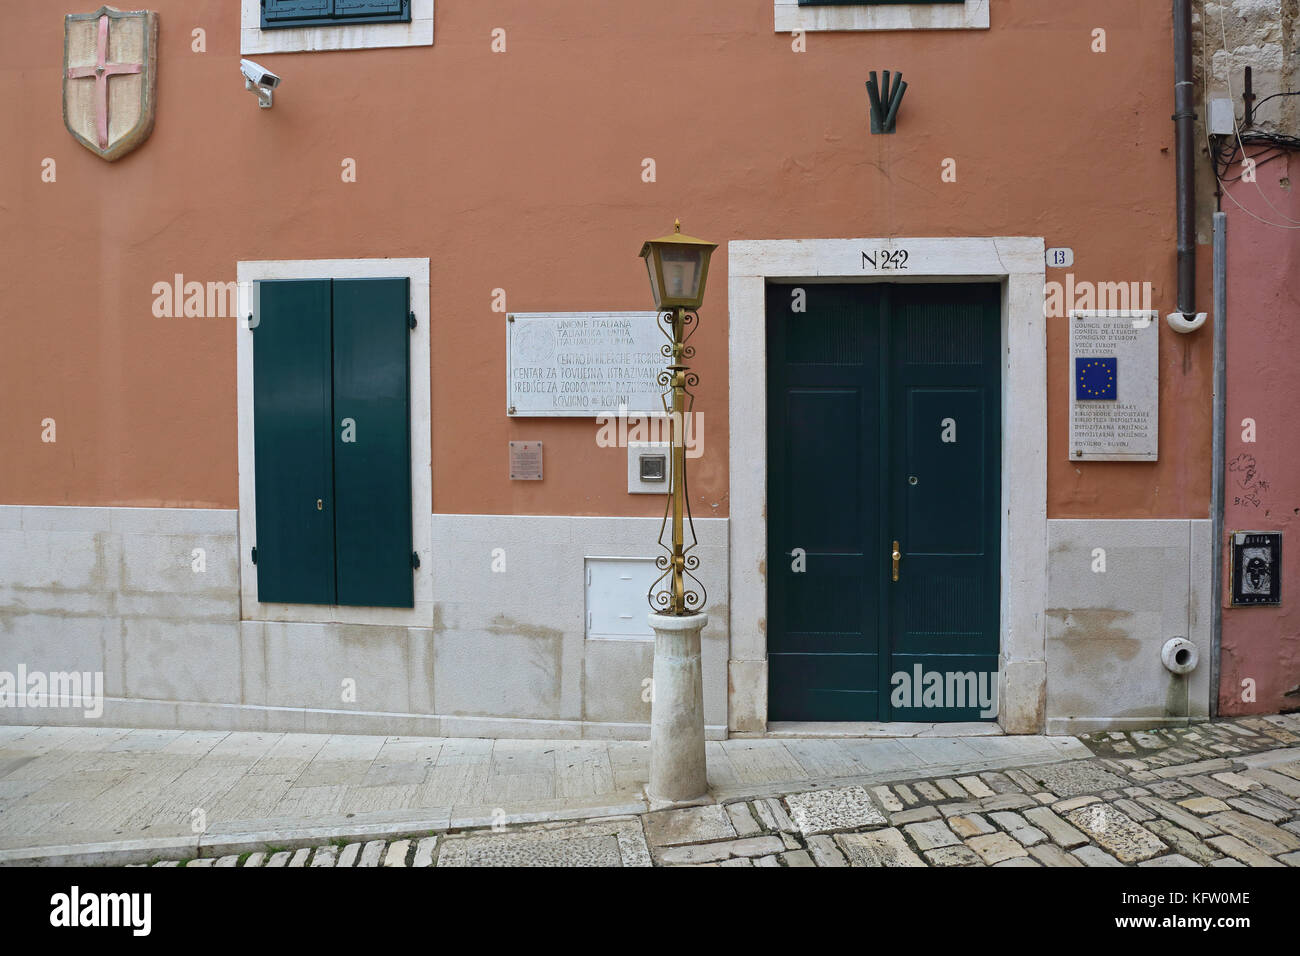 ROVINJ, CROATIA - OCTOBER 15: Historical Research Center Italian Union in Rovinj on OCTOBER 15, 2014. Council of Europe and Depositary Library Governm Stock Photo